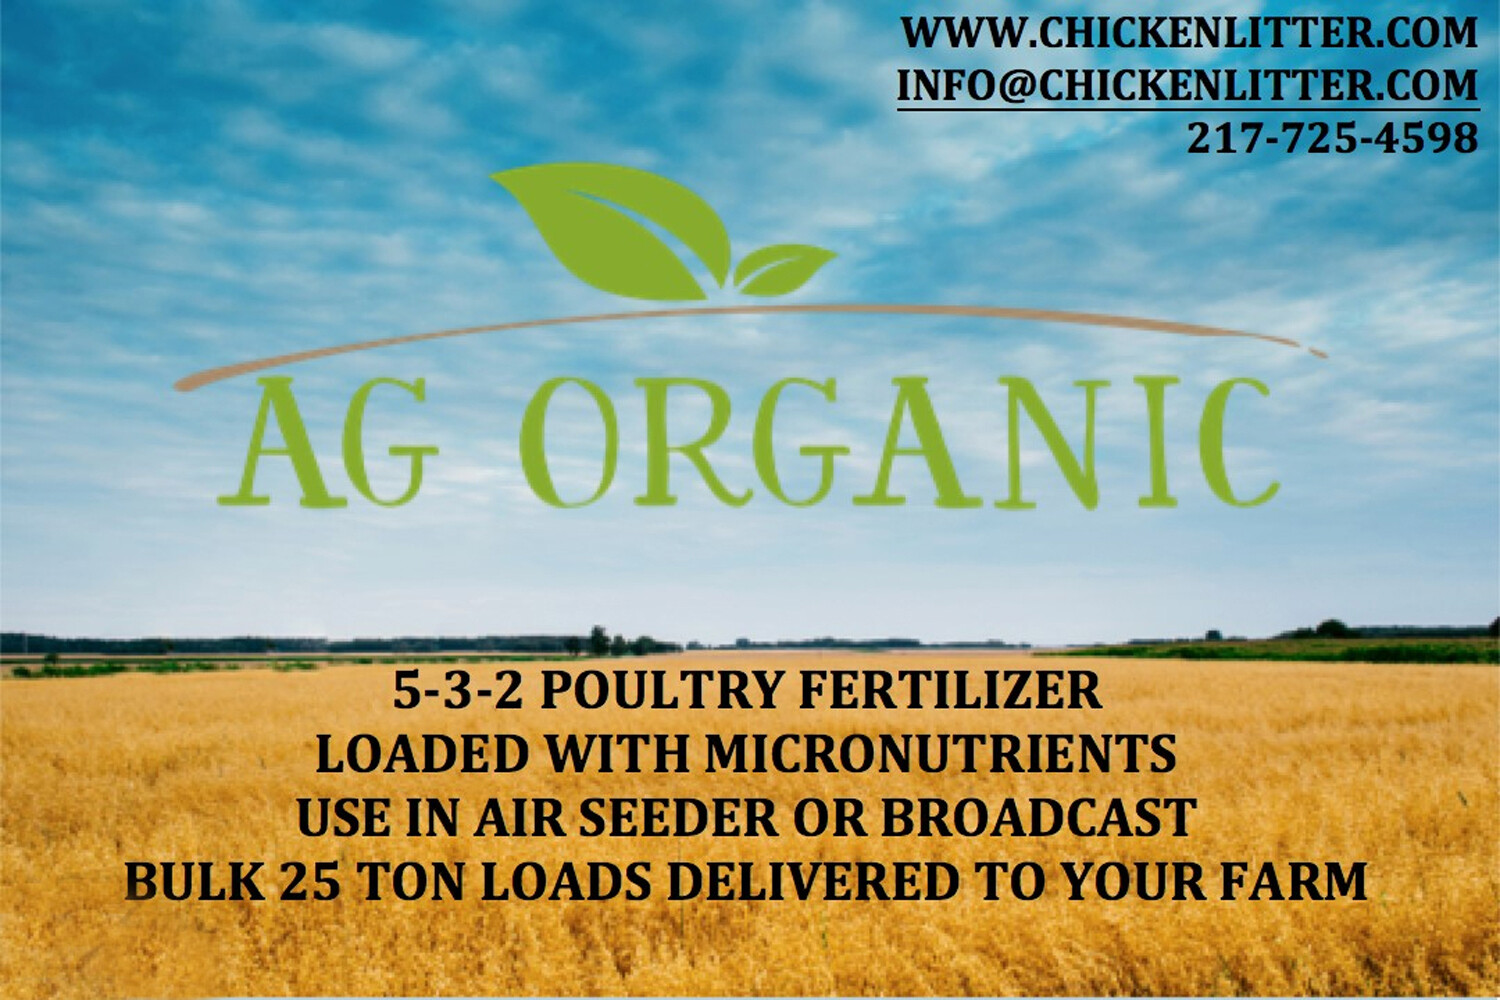 Business Card Size Ad Organic Matters - Quarterly Newsletter